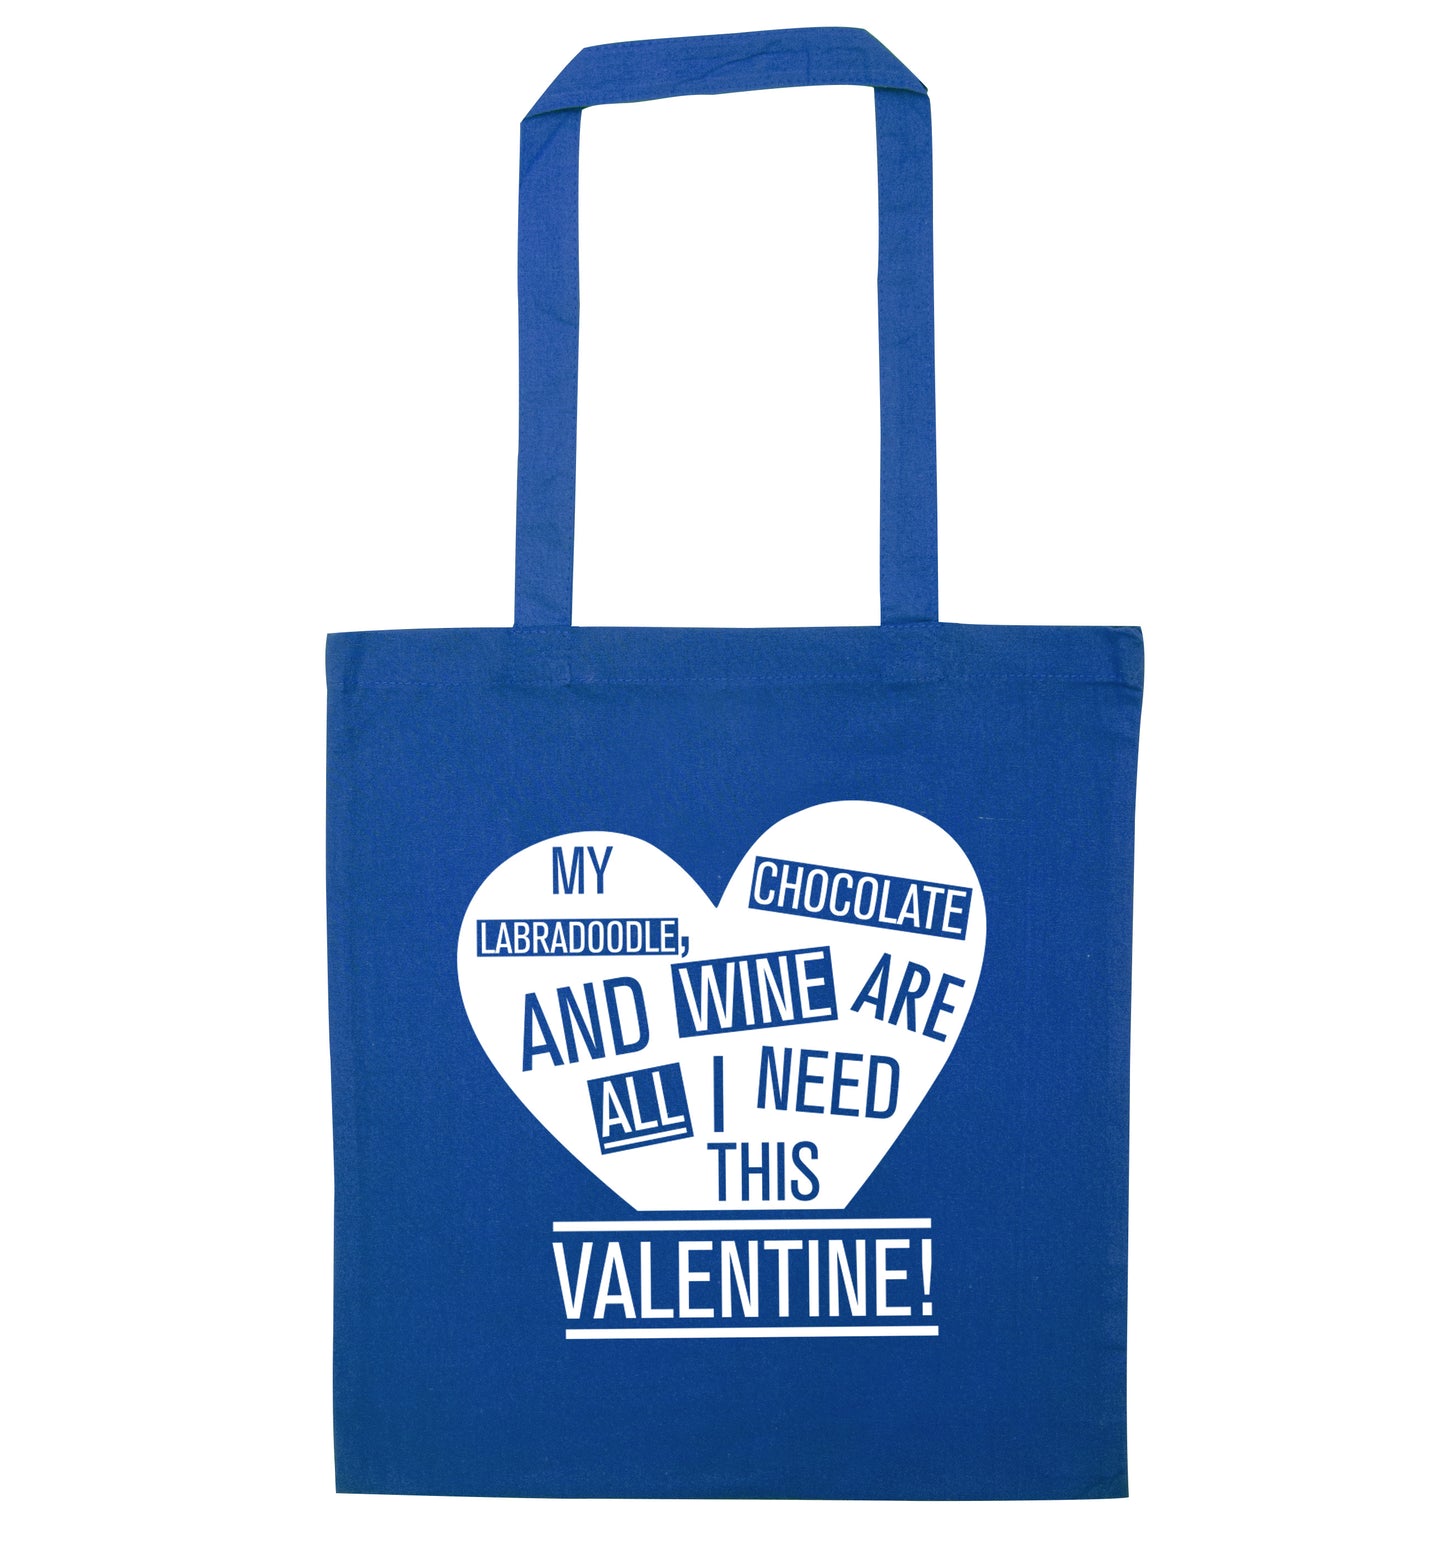 My labradoodle, chocolate and wine are all I need this valentine! blue tote bag